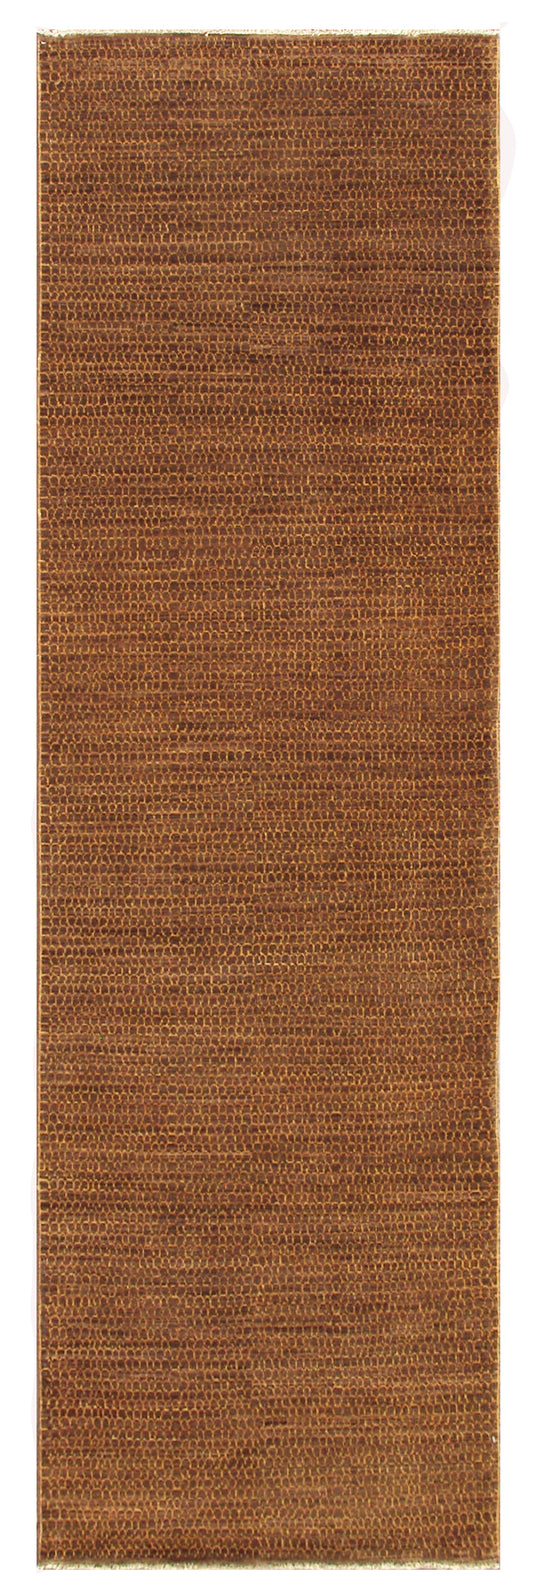 10'x3' Gold Honeycomb Design Hand-knotted Ariana Modern Area Rug